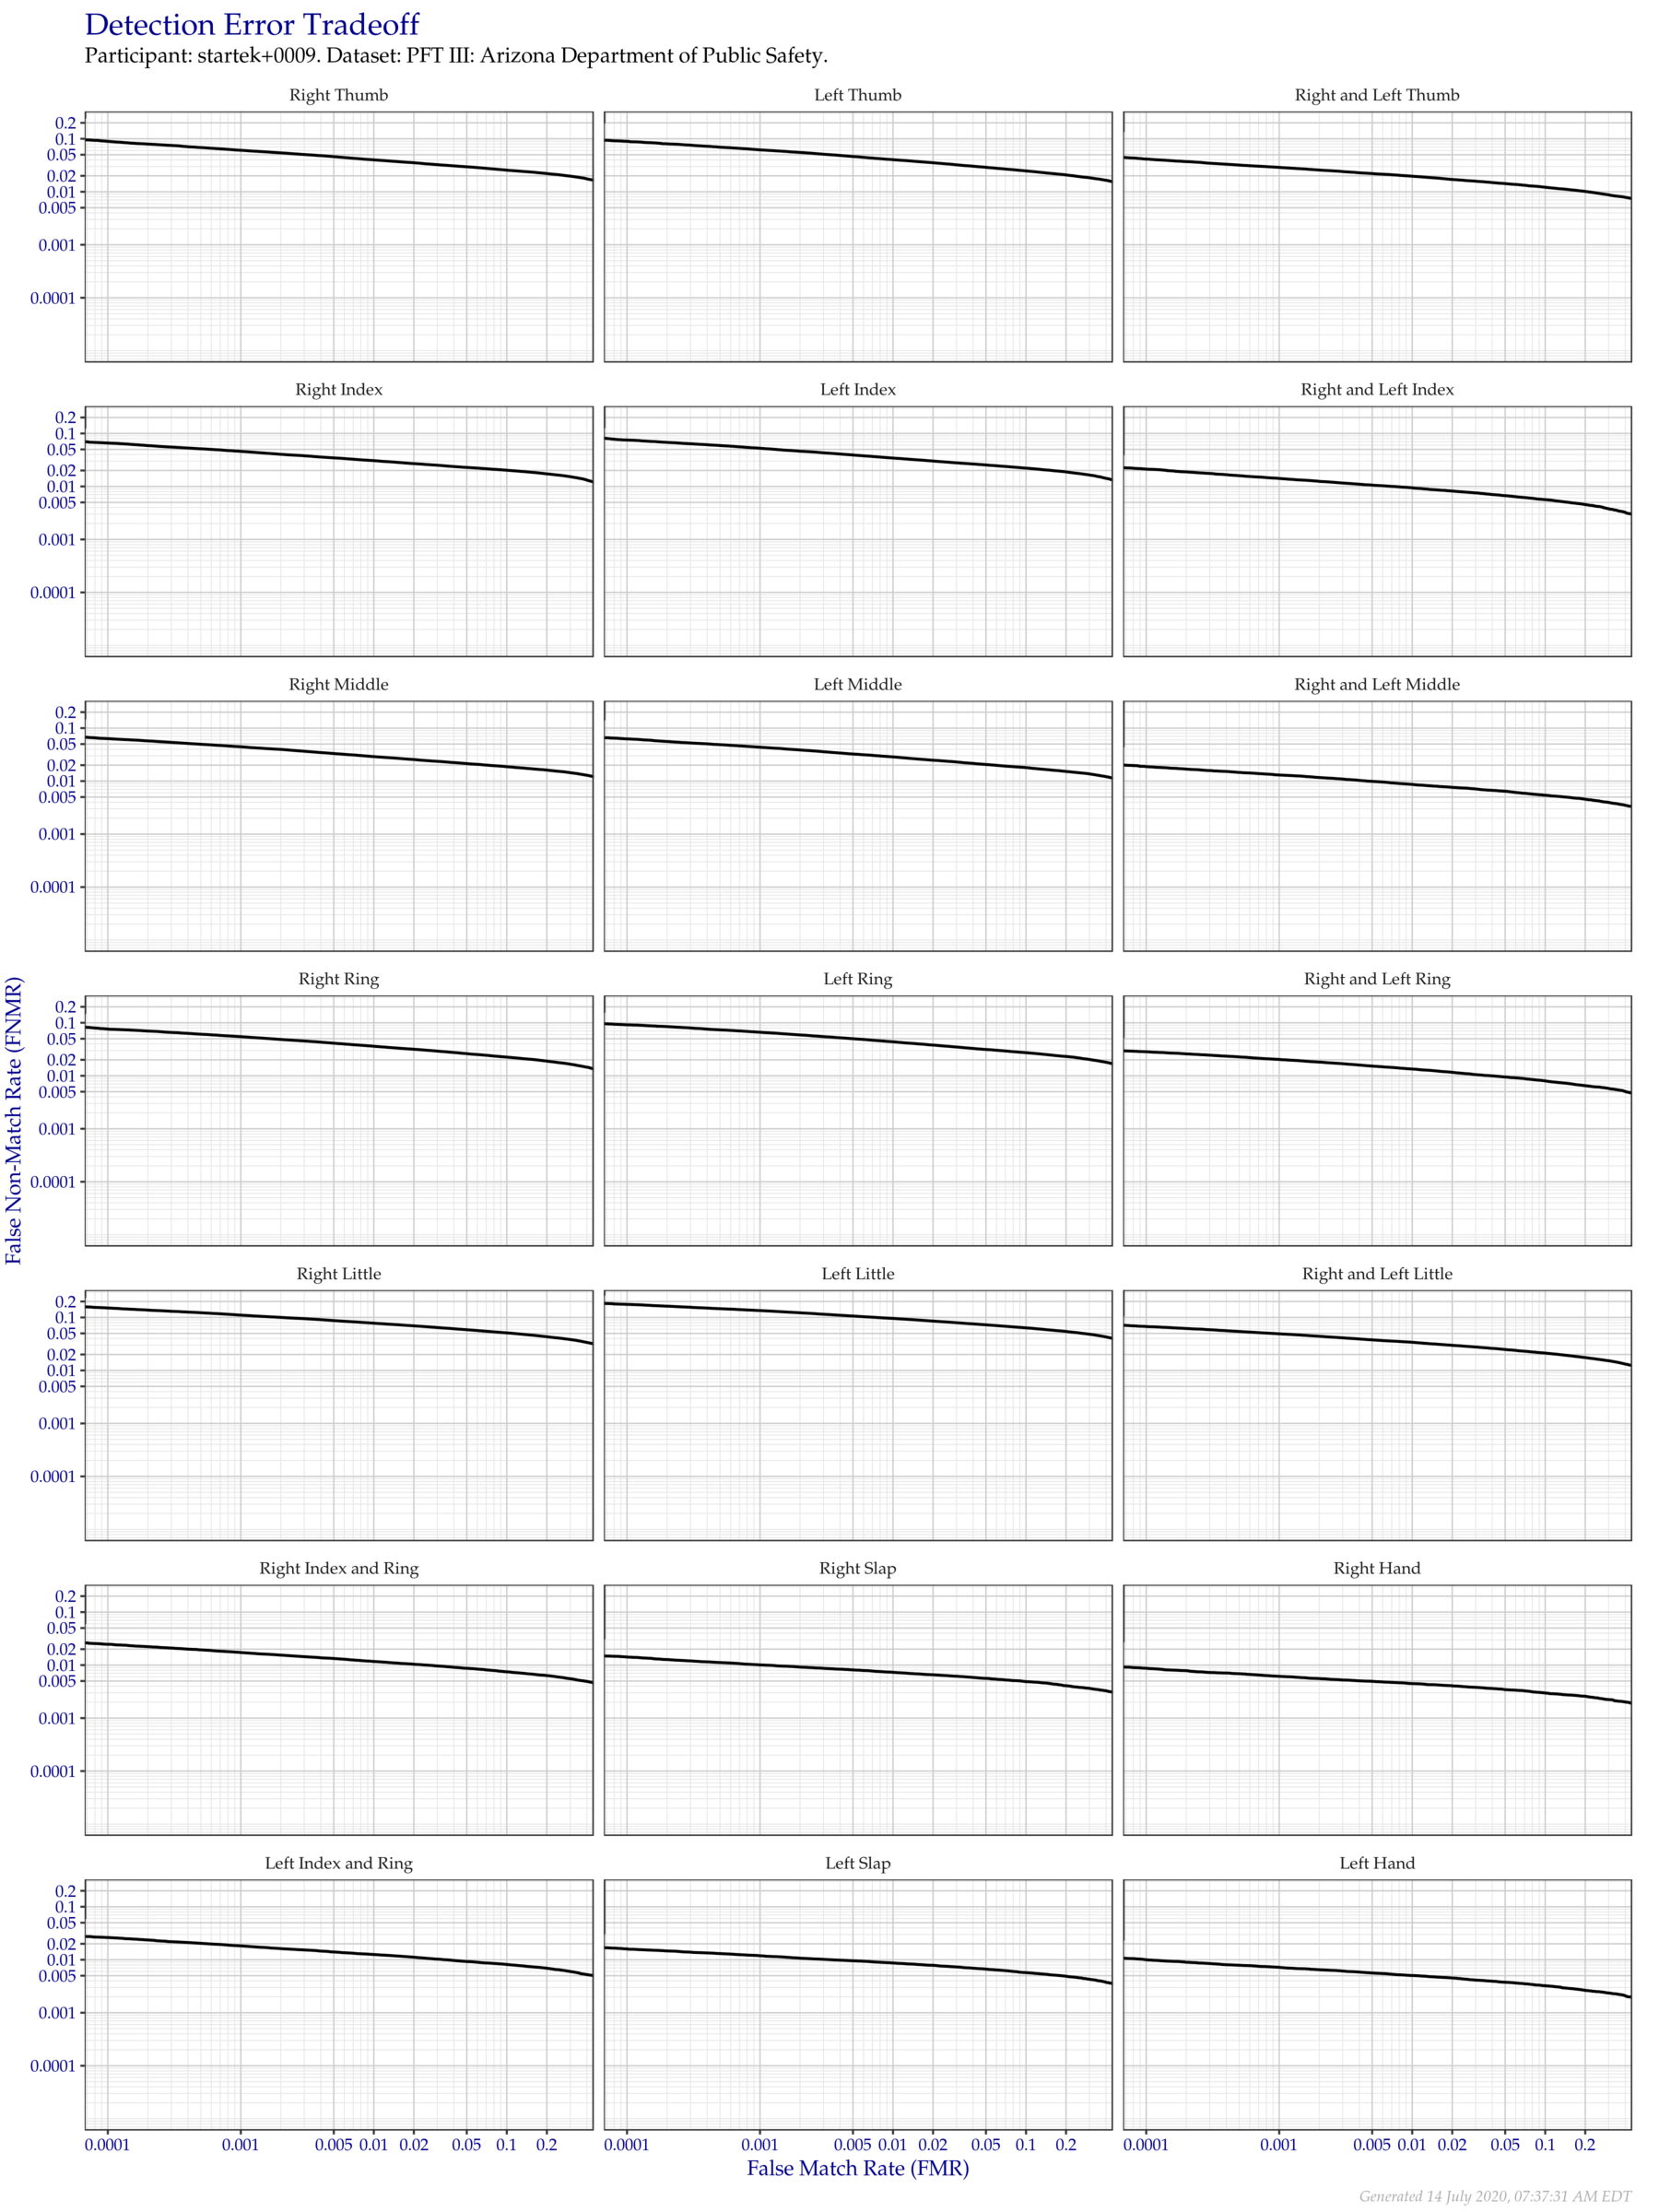 Detection error tradeoff of all comparisons from all fingers in the PFT III AZDPS dataset, separated by finger position. Combined finger positions were generated by sum fusion.